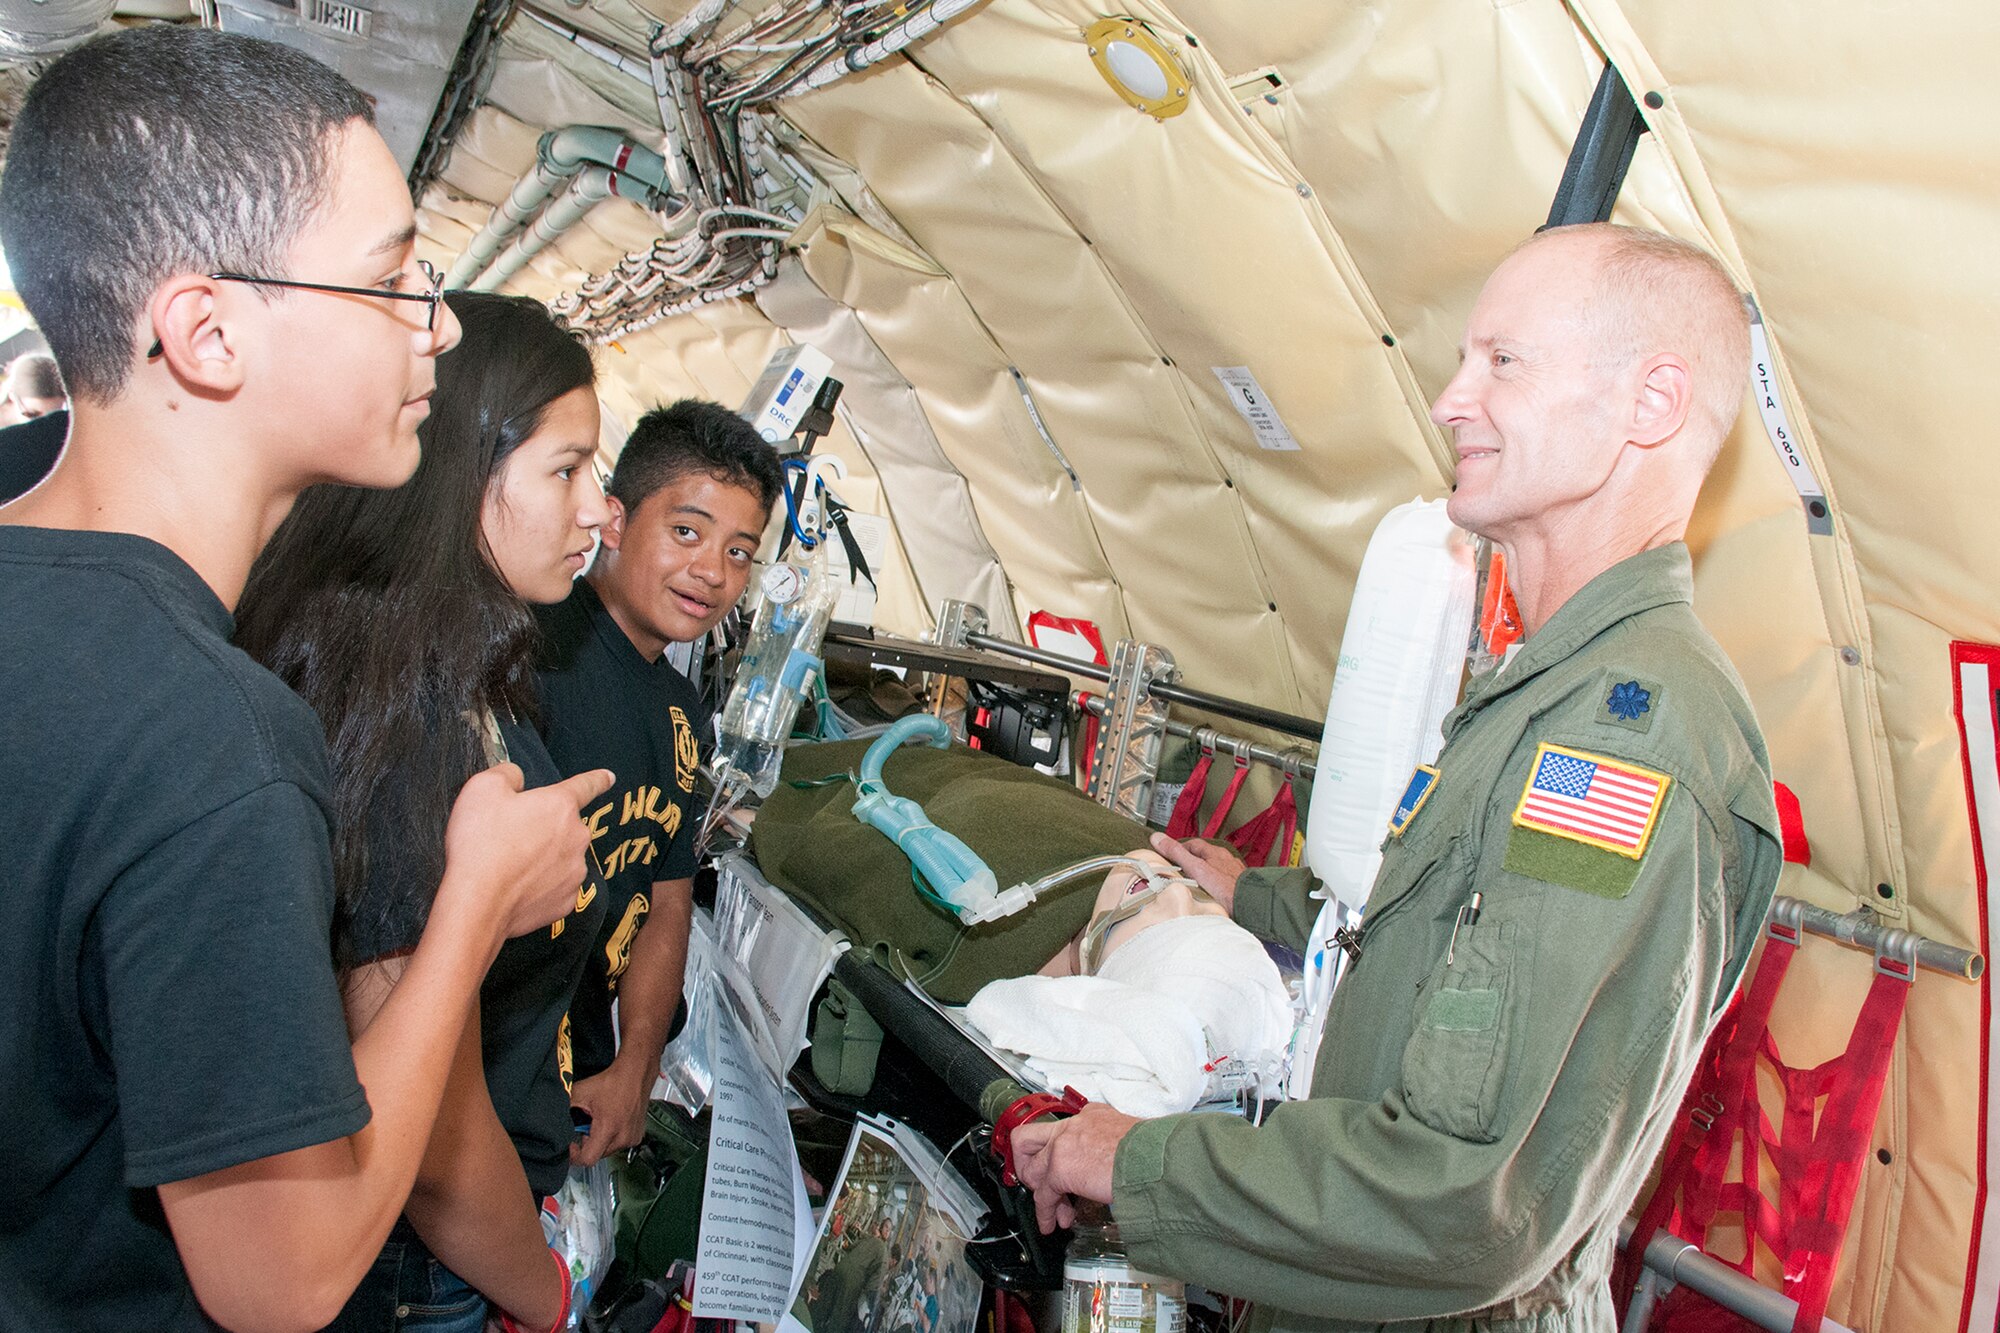 Lt. Col. Patrick Falvey, 459th Aeromedical Staging Squadron critical care transport nurse (right), discusses the inflight medical capabilities provided by the squadron to a group of T.C. Williams high school students onboard a KC-135R Stratotanker during the Andrews Air Show Sept. 18, 2015.The 459th Airlift Wing provided tours of the aircraft and illustrated medical and refueling capabilities to the public during the open house. (U.S. Air Force photo/Staff Sgt. Kat Justen)